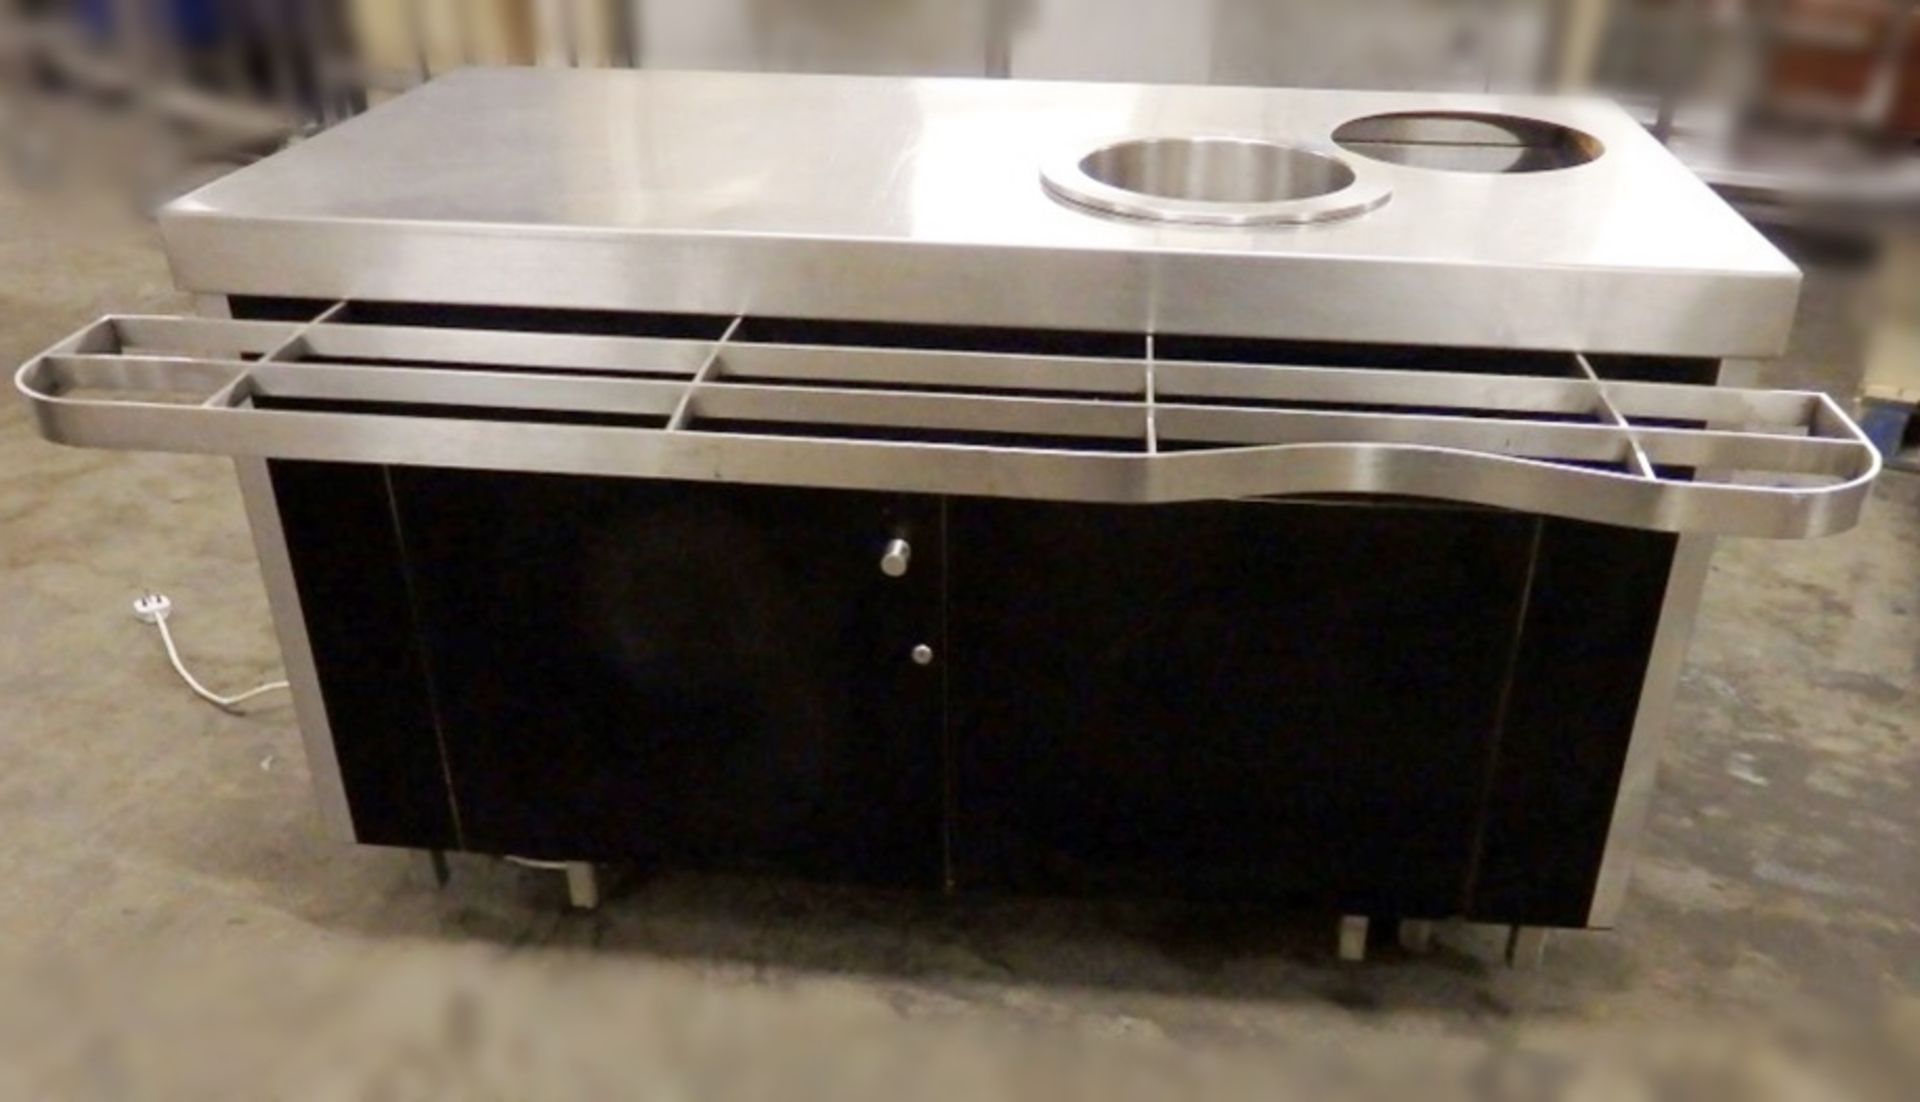 1 x Stainless Steel Hot Soup Counter - Features Tray Rail, Sockets & Fusebox - Dimensions: W150 x - Image 8 of 8